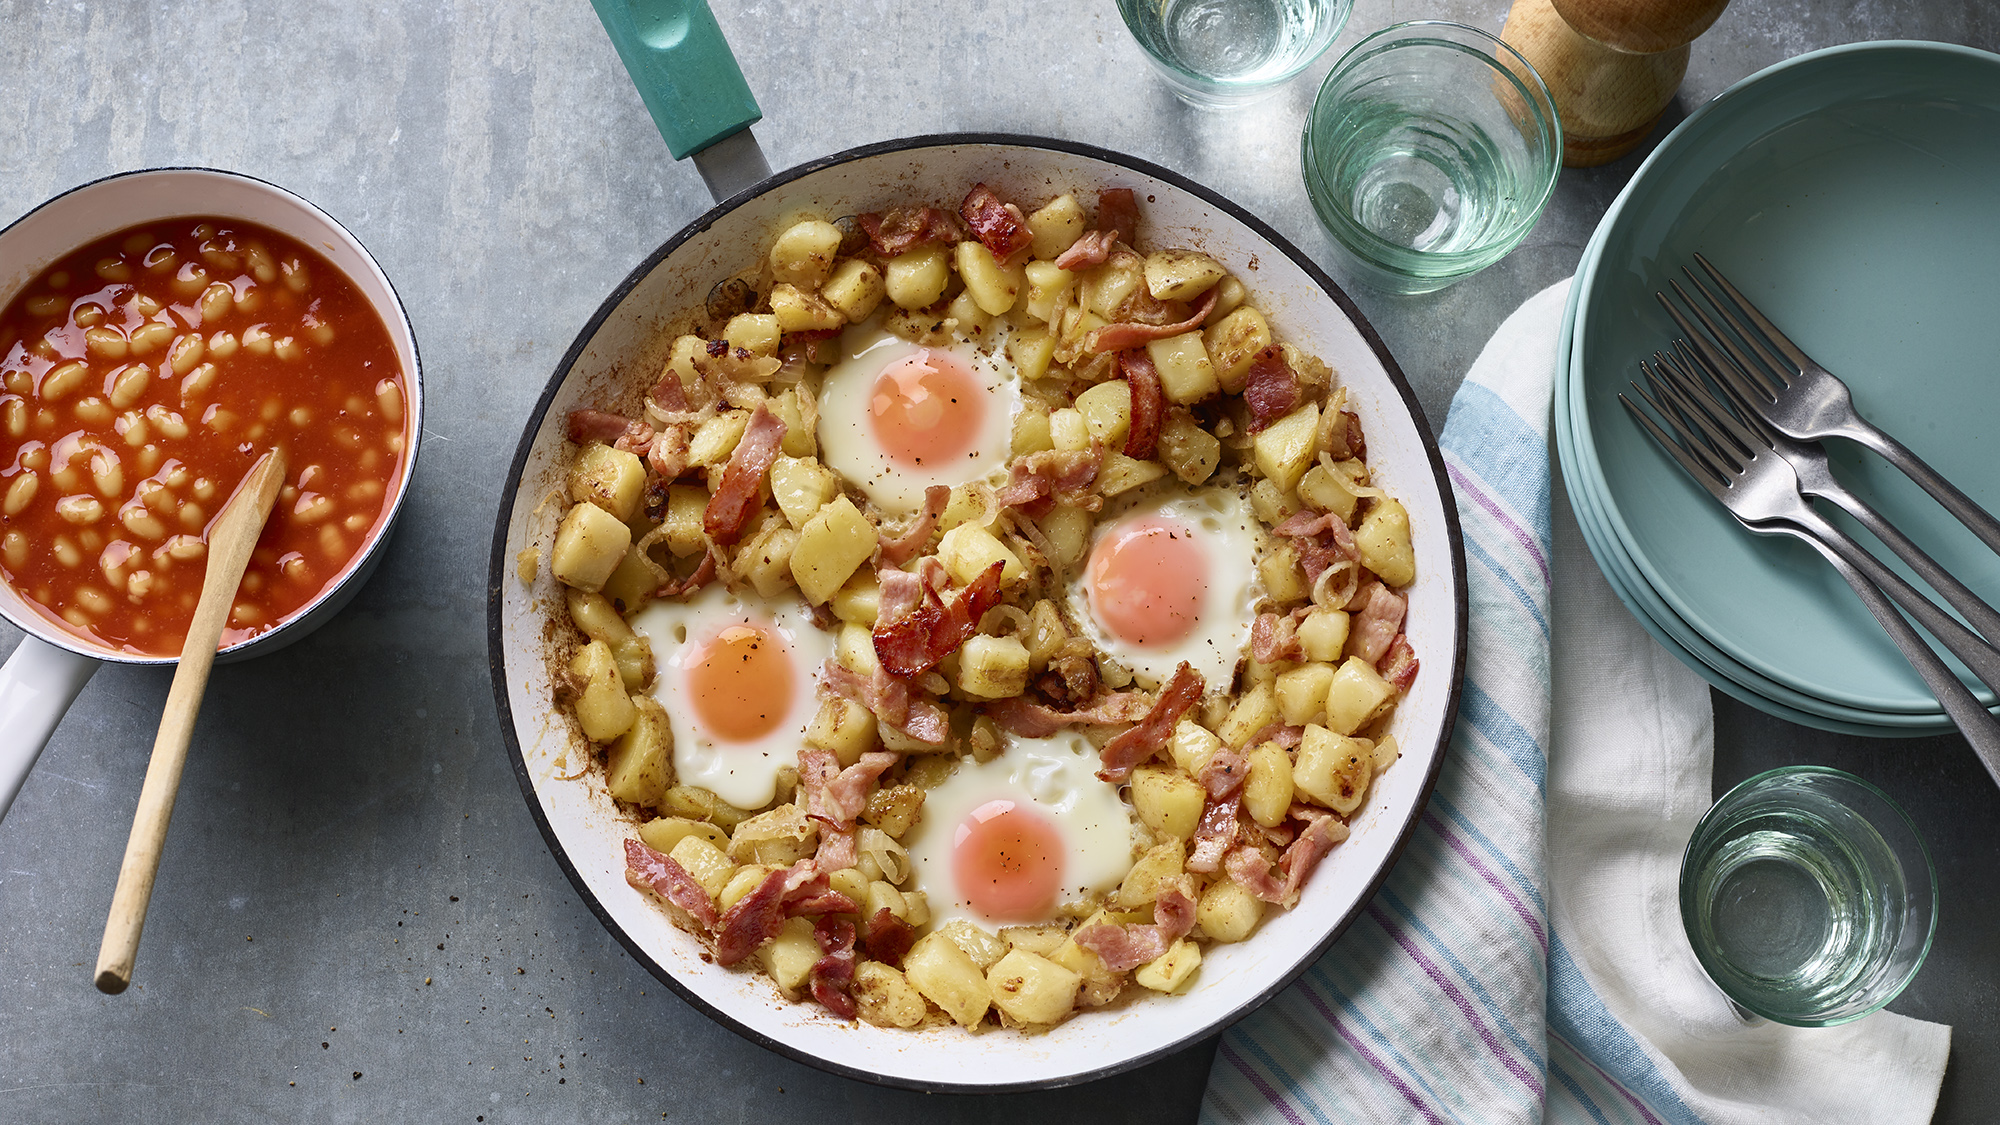 https://food-images.files.bbci.co.uk/food/recipes/egg_and_bacon_hash_85605_16x9.jpg